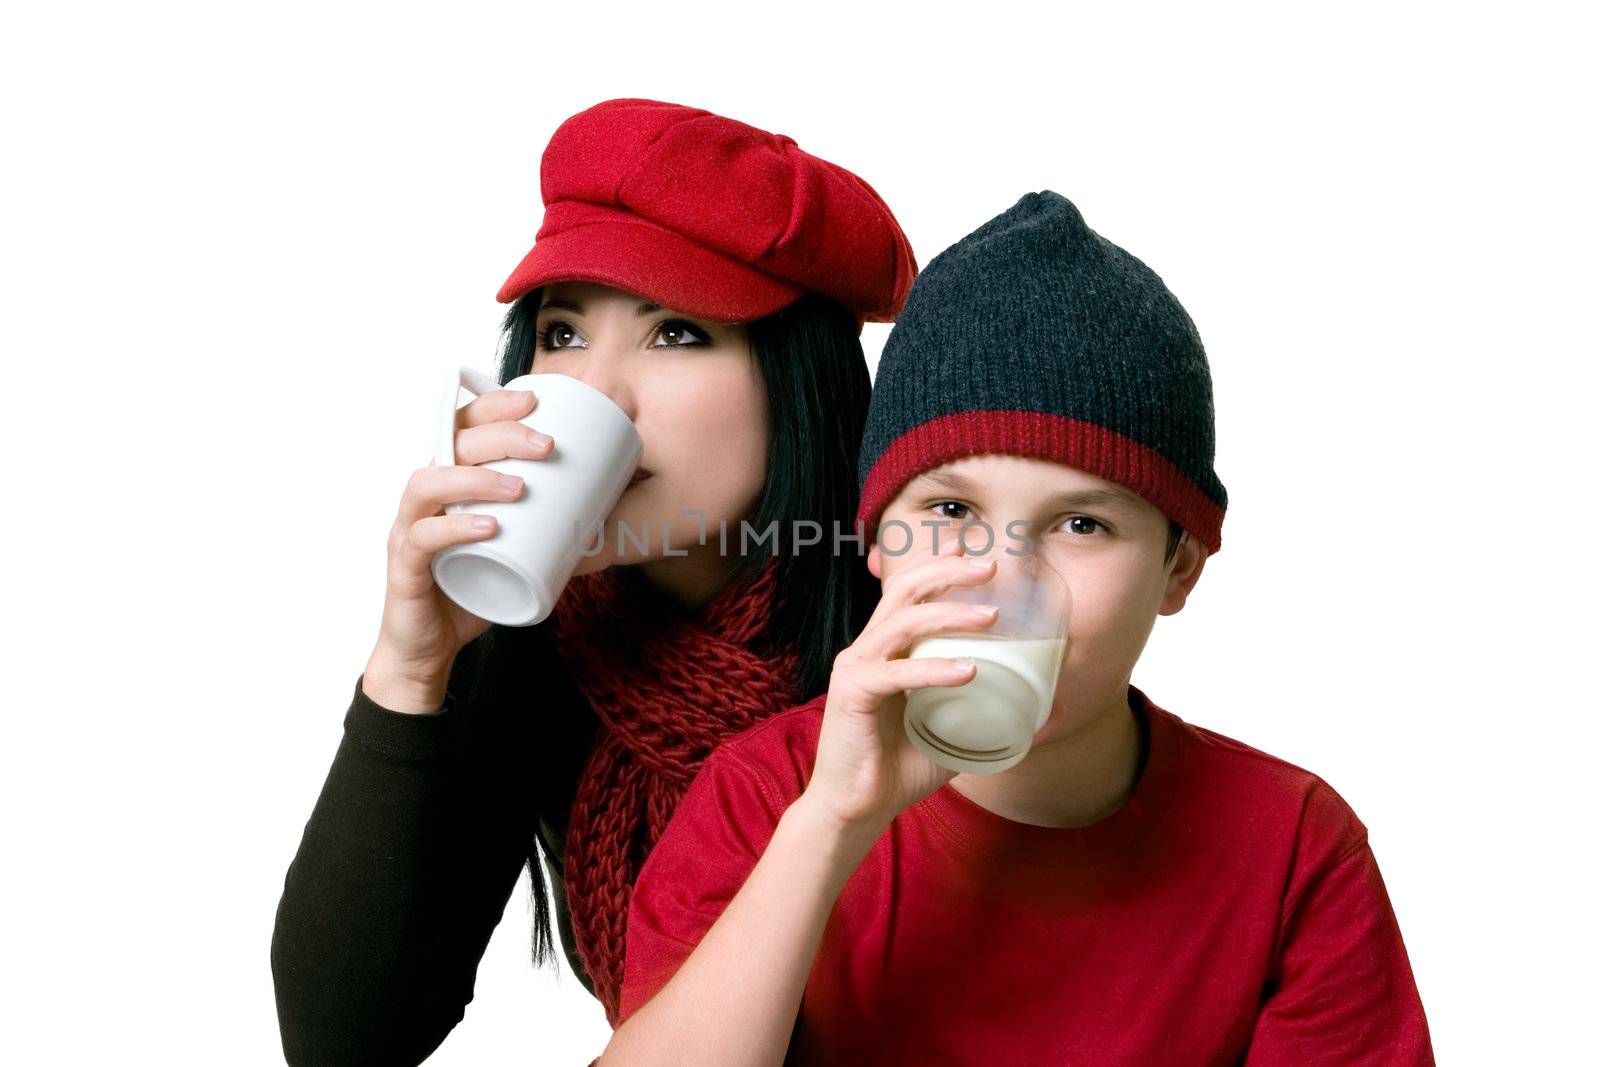 Two people drinking beverages by lovleah